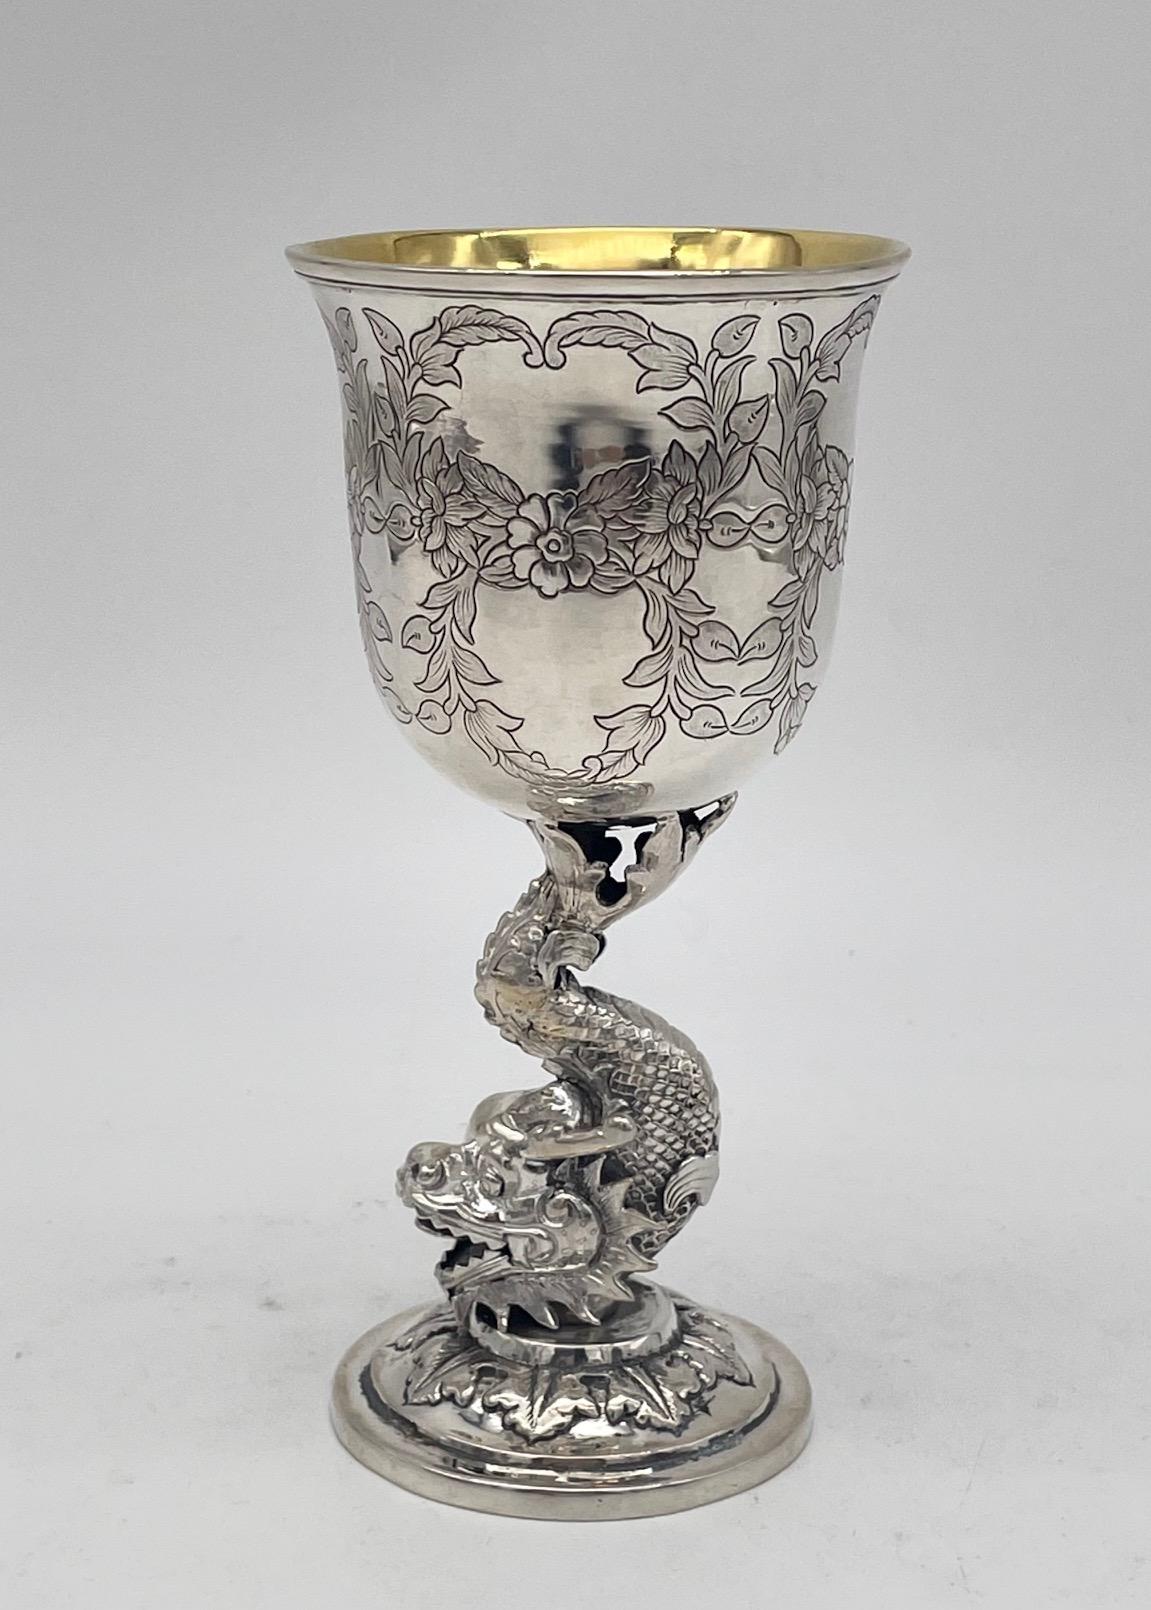 A Chinese Export Silver Goblet with dragon stem, engraved foliage to the bowl, and a gilded interior. The maker is FengzhaoJi (冯朝记), and it was retailed by the firm of Leeching, circa 1875.
158gm.